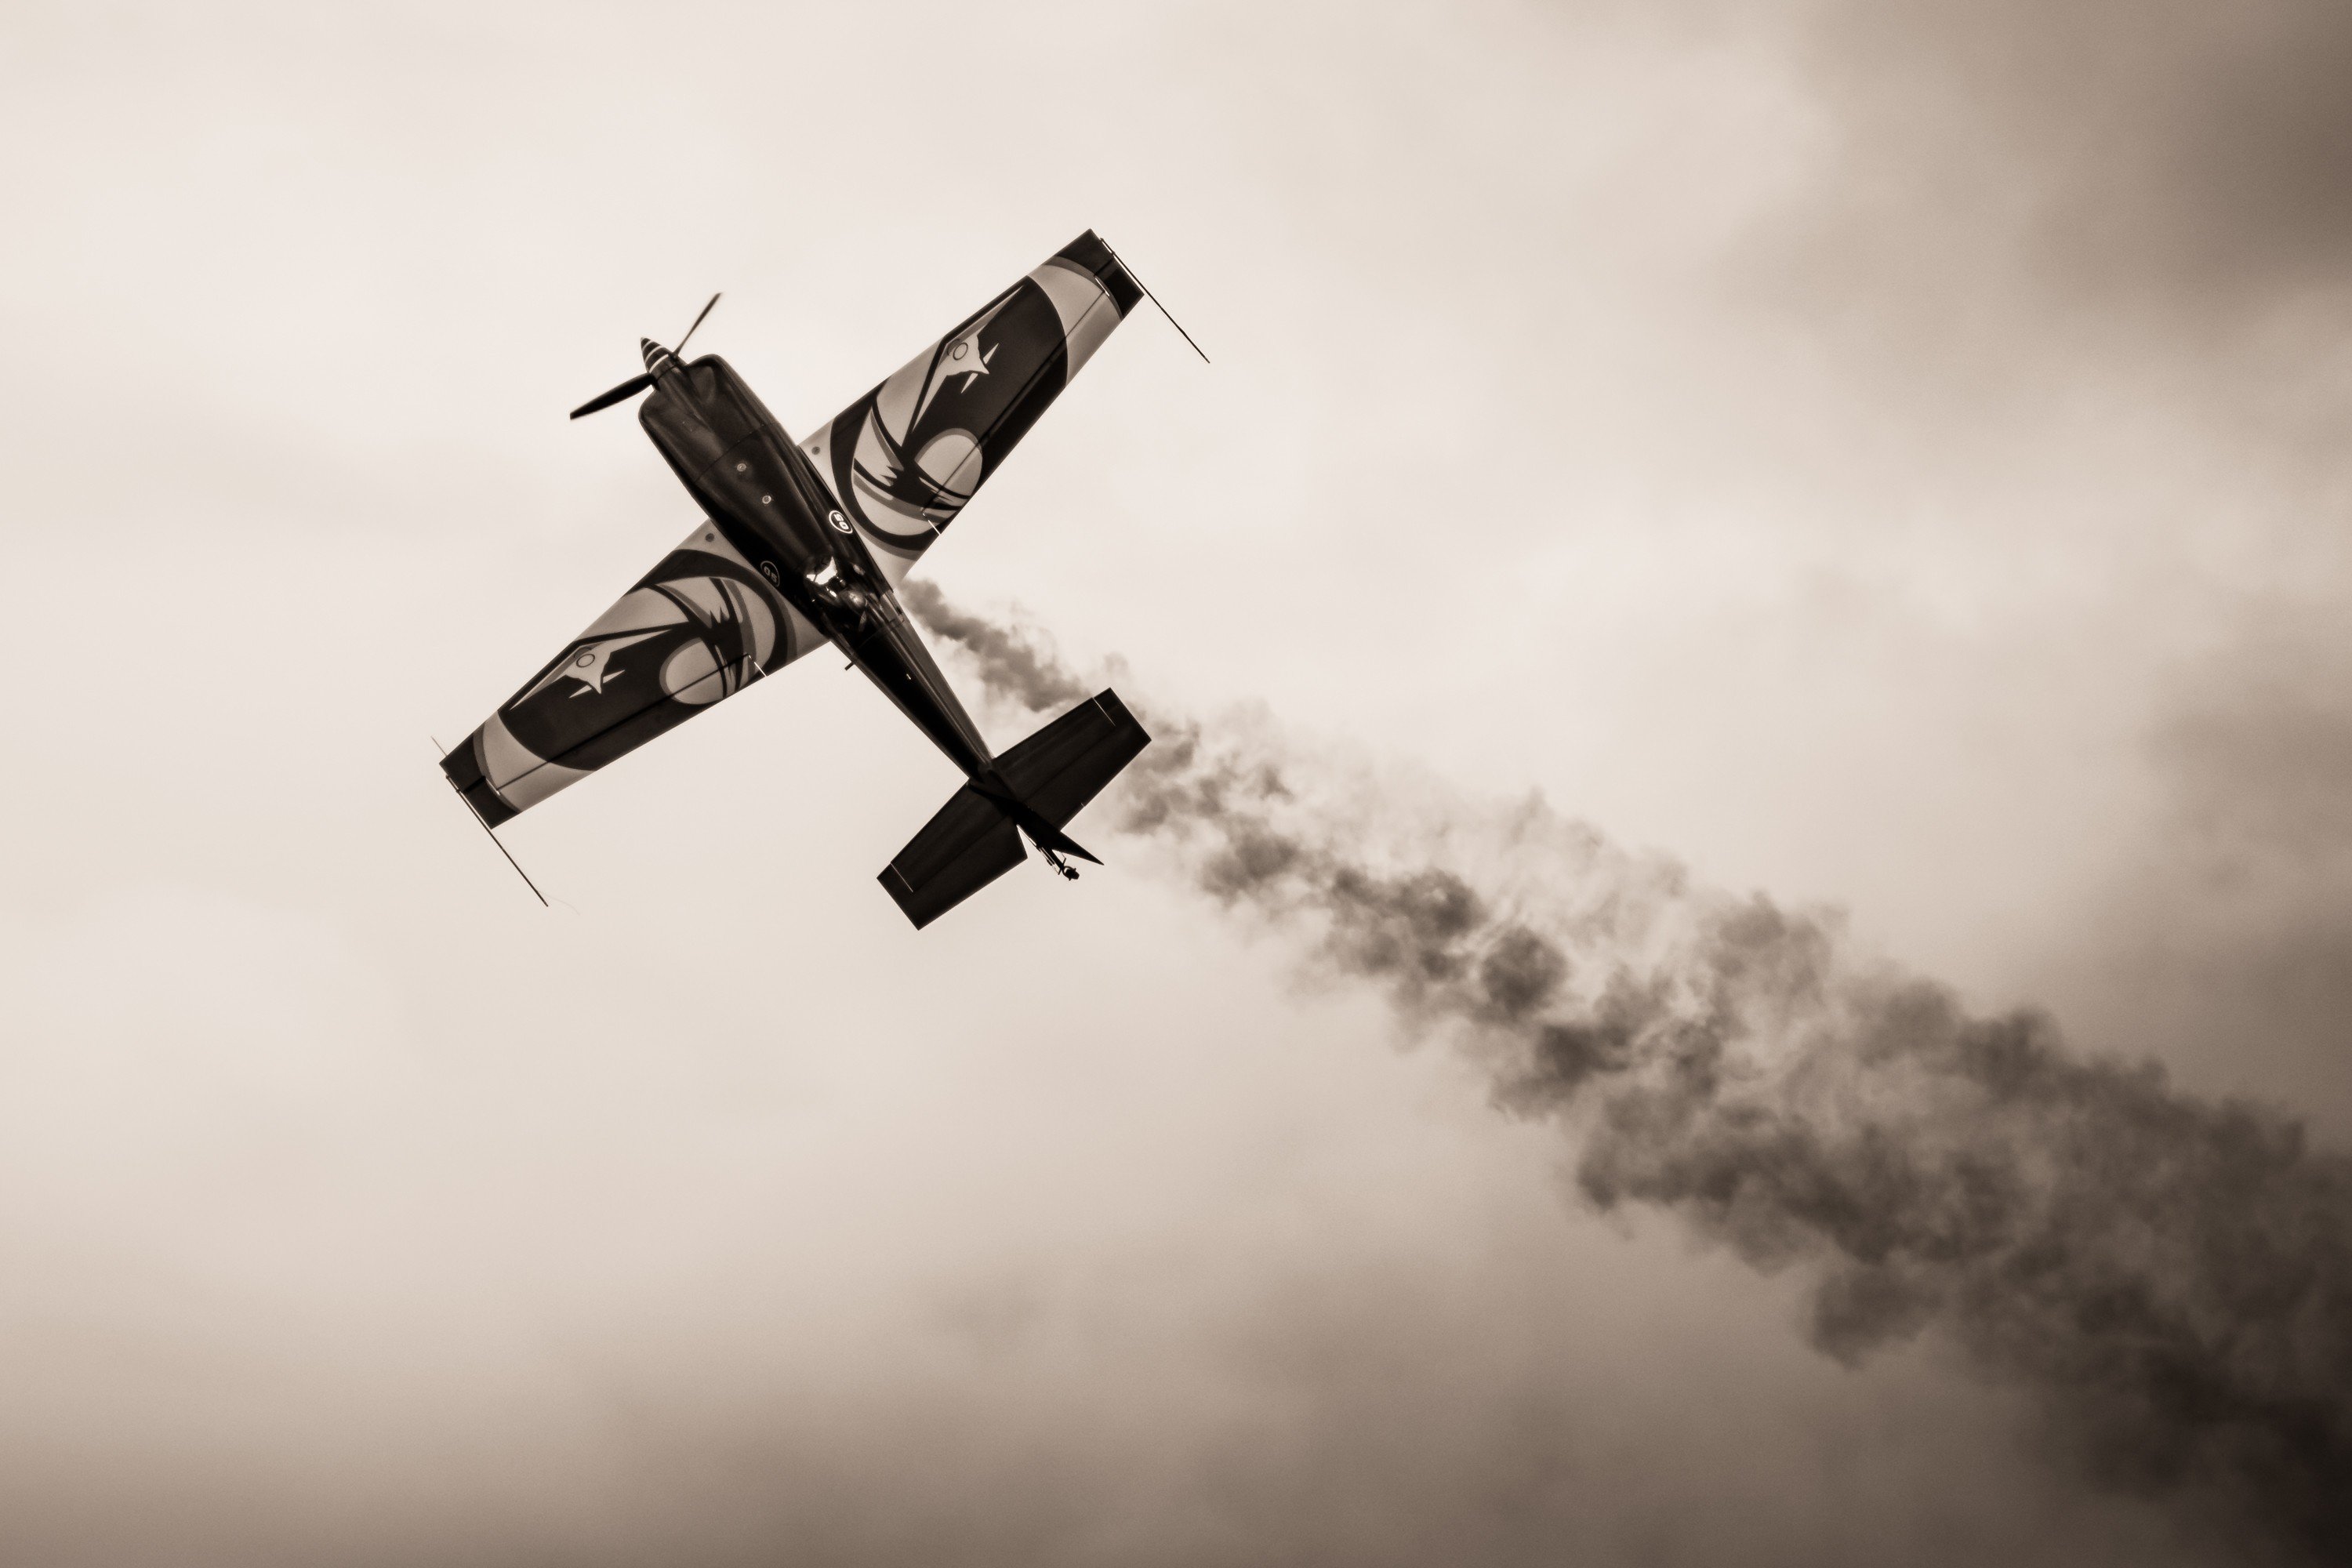 extra 330, Airshows, Monochrome Wallpaper